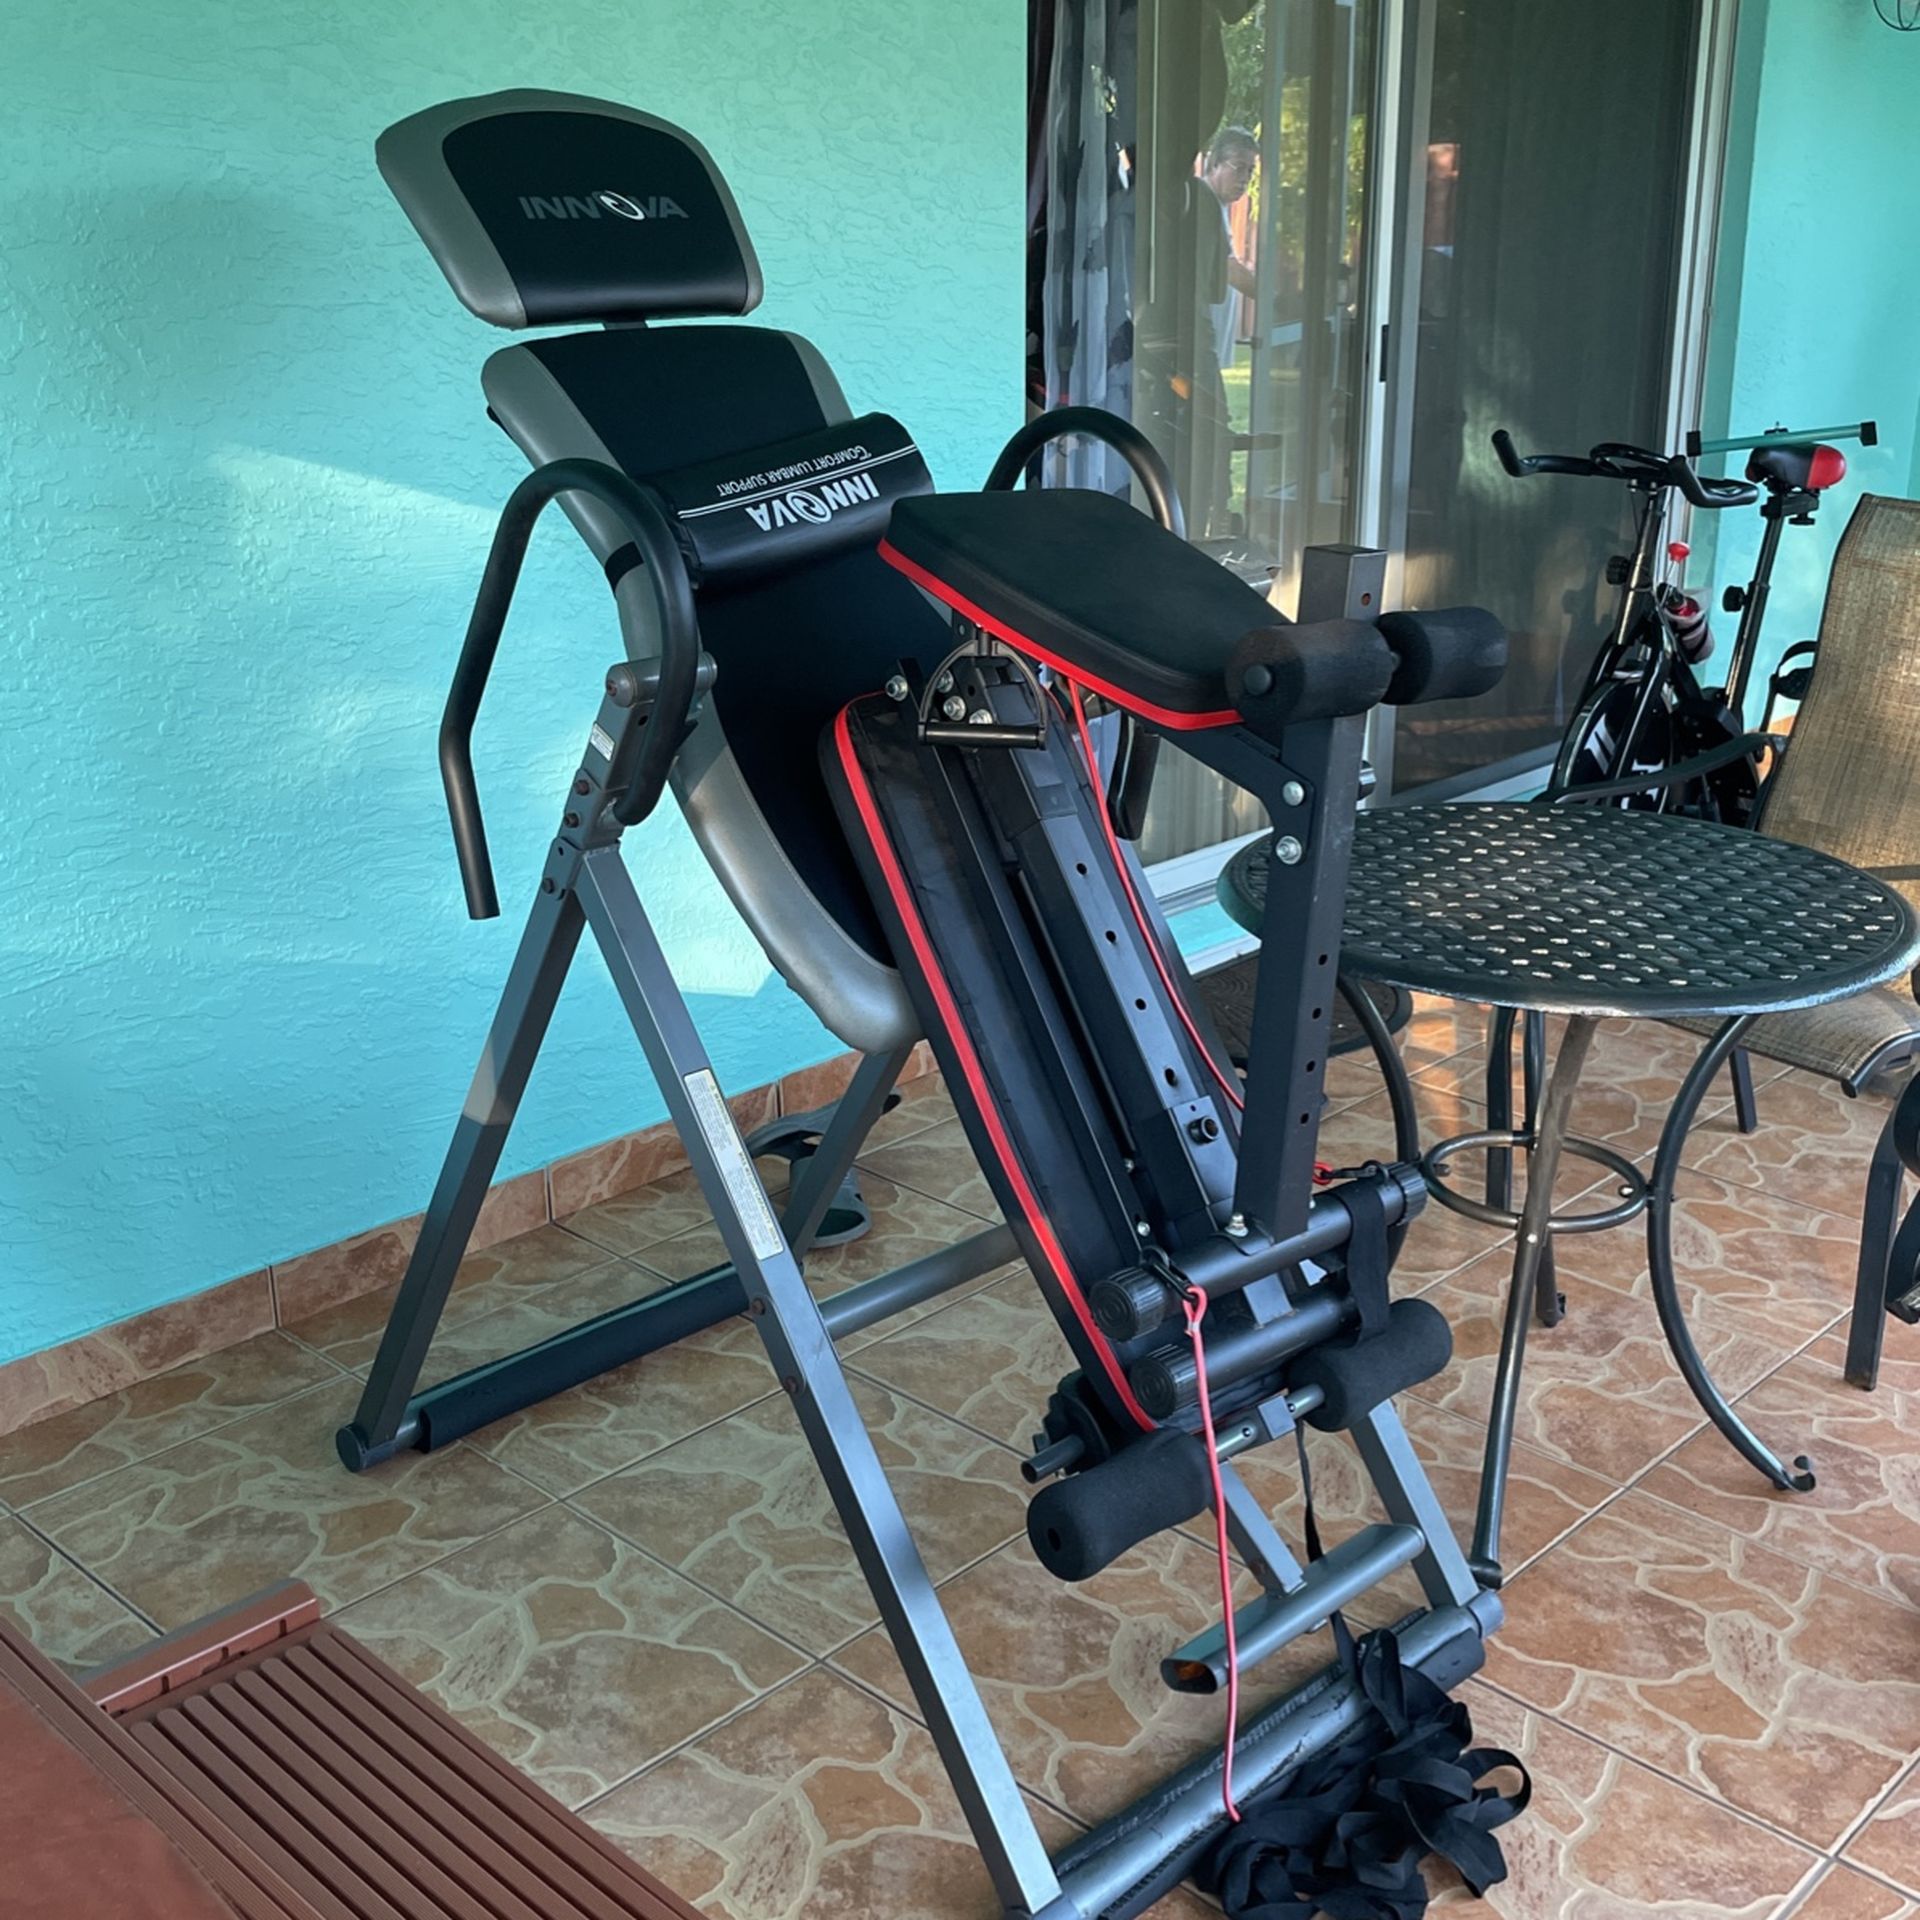 Home Workout Equipment (shoot Me An Offer) If Interested 